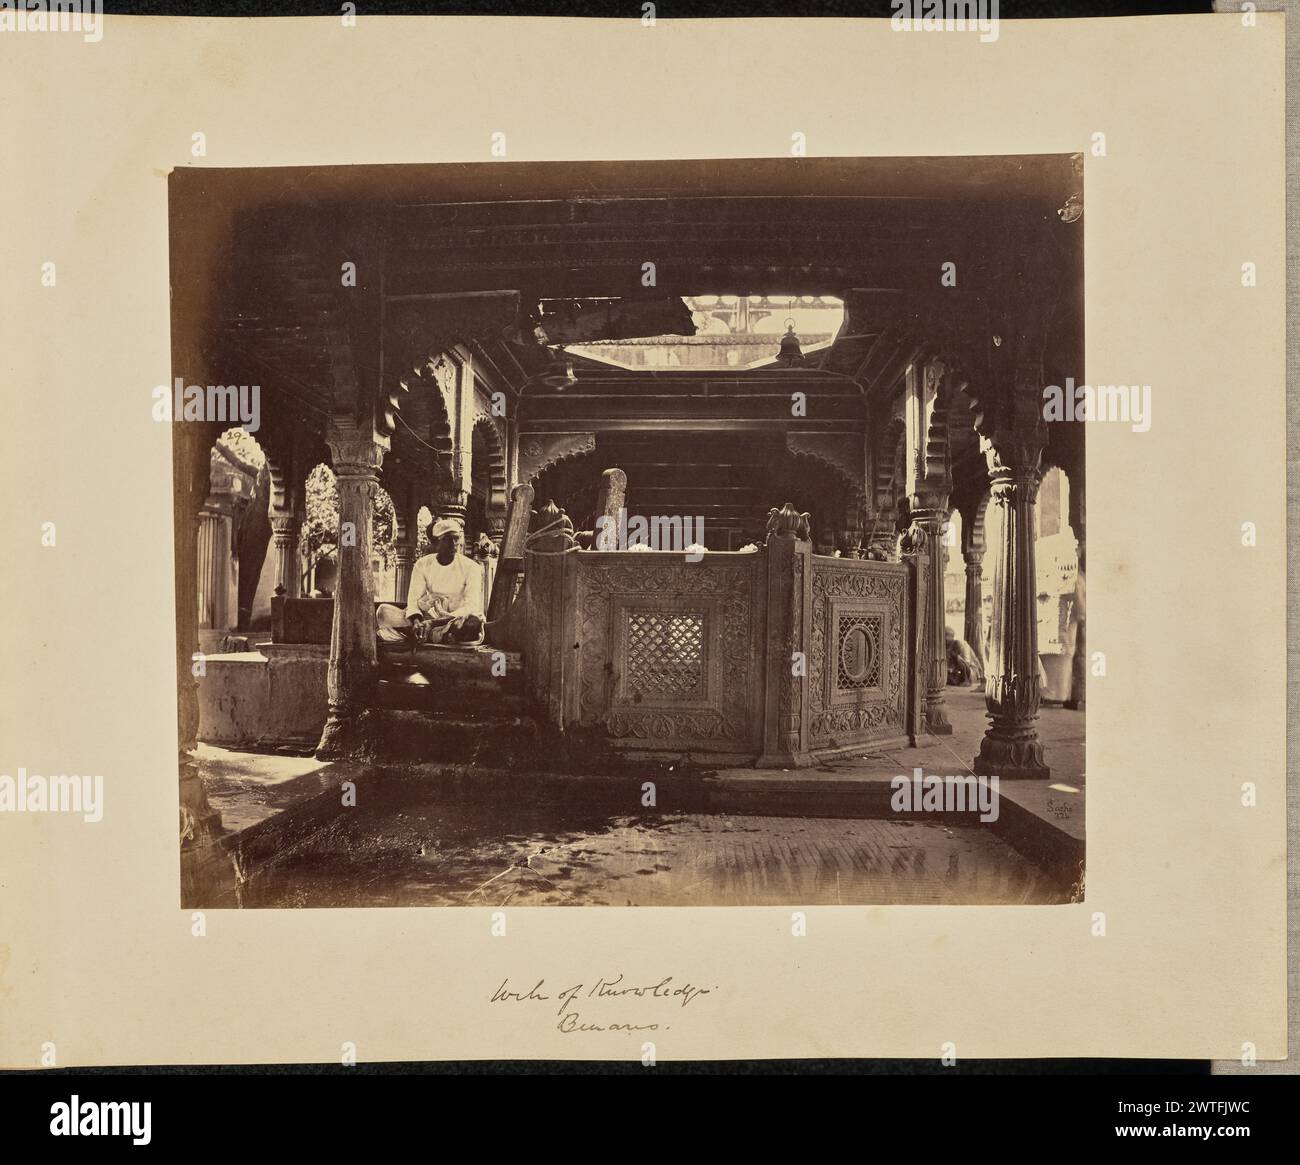 Well of Knowledge. Benares. John Edward Saché, photographer (Prussian or British, born Prussia, 1824 - 1882) about 1868 A man sits next to the well in Gyanvapi Mosque, also known as the Well of Knowledge. An intricately carved screen is installed around the well. (Recto, print) lower right, inscribed in the negative: '324'; (Recto, mount) lower center, in brown ink: 'Well of Knowledge. / Benares.'; (Verso, mount) lower left, in pencil: 'A48.48 (Saché)'; Stock Photo